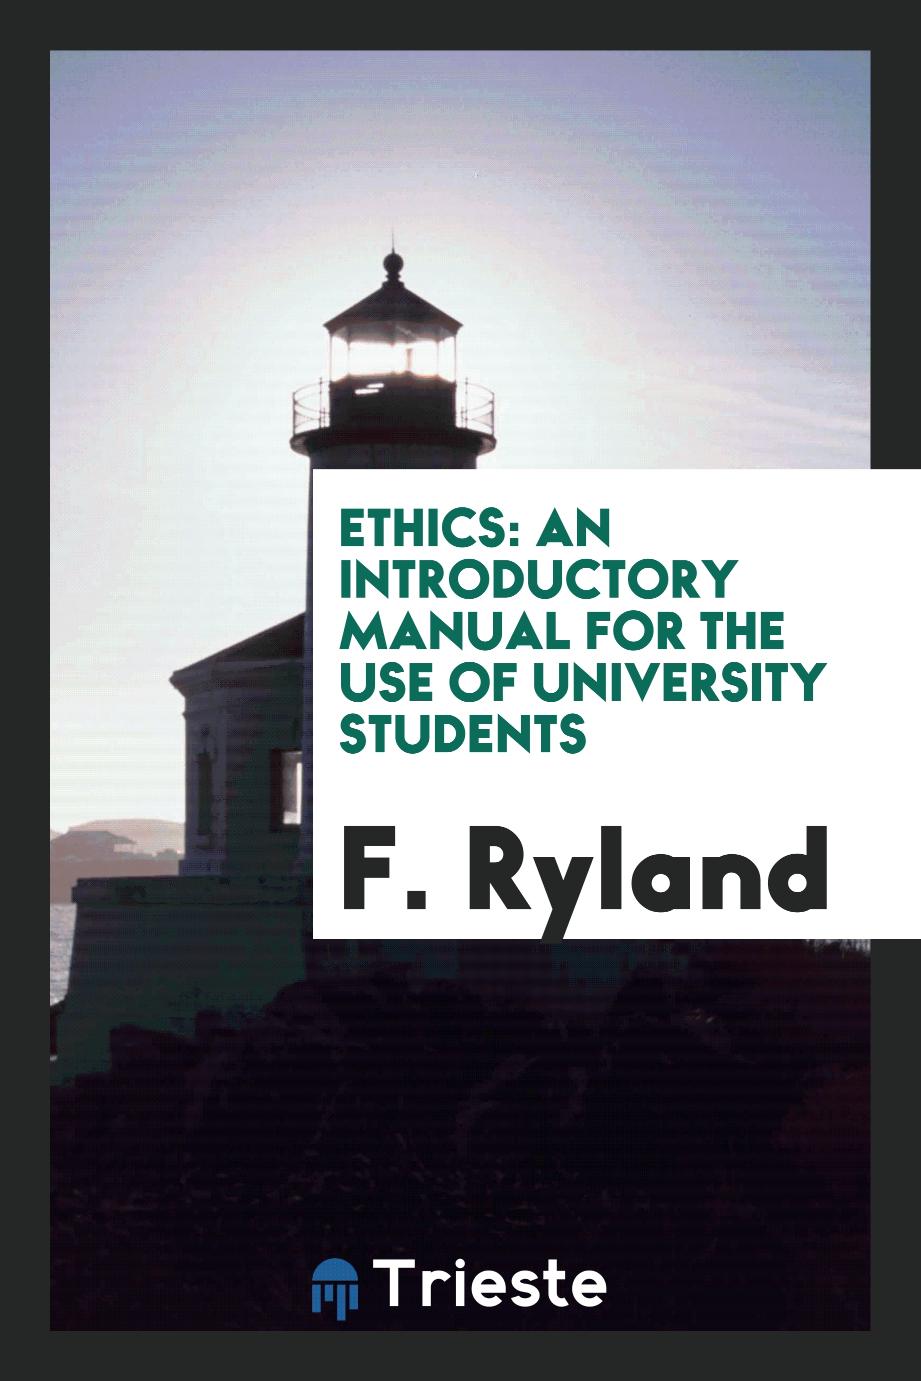 F. Ryland - Ethics: An Introductory Manual for the Use of University Students